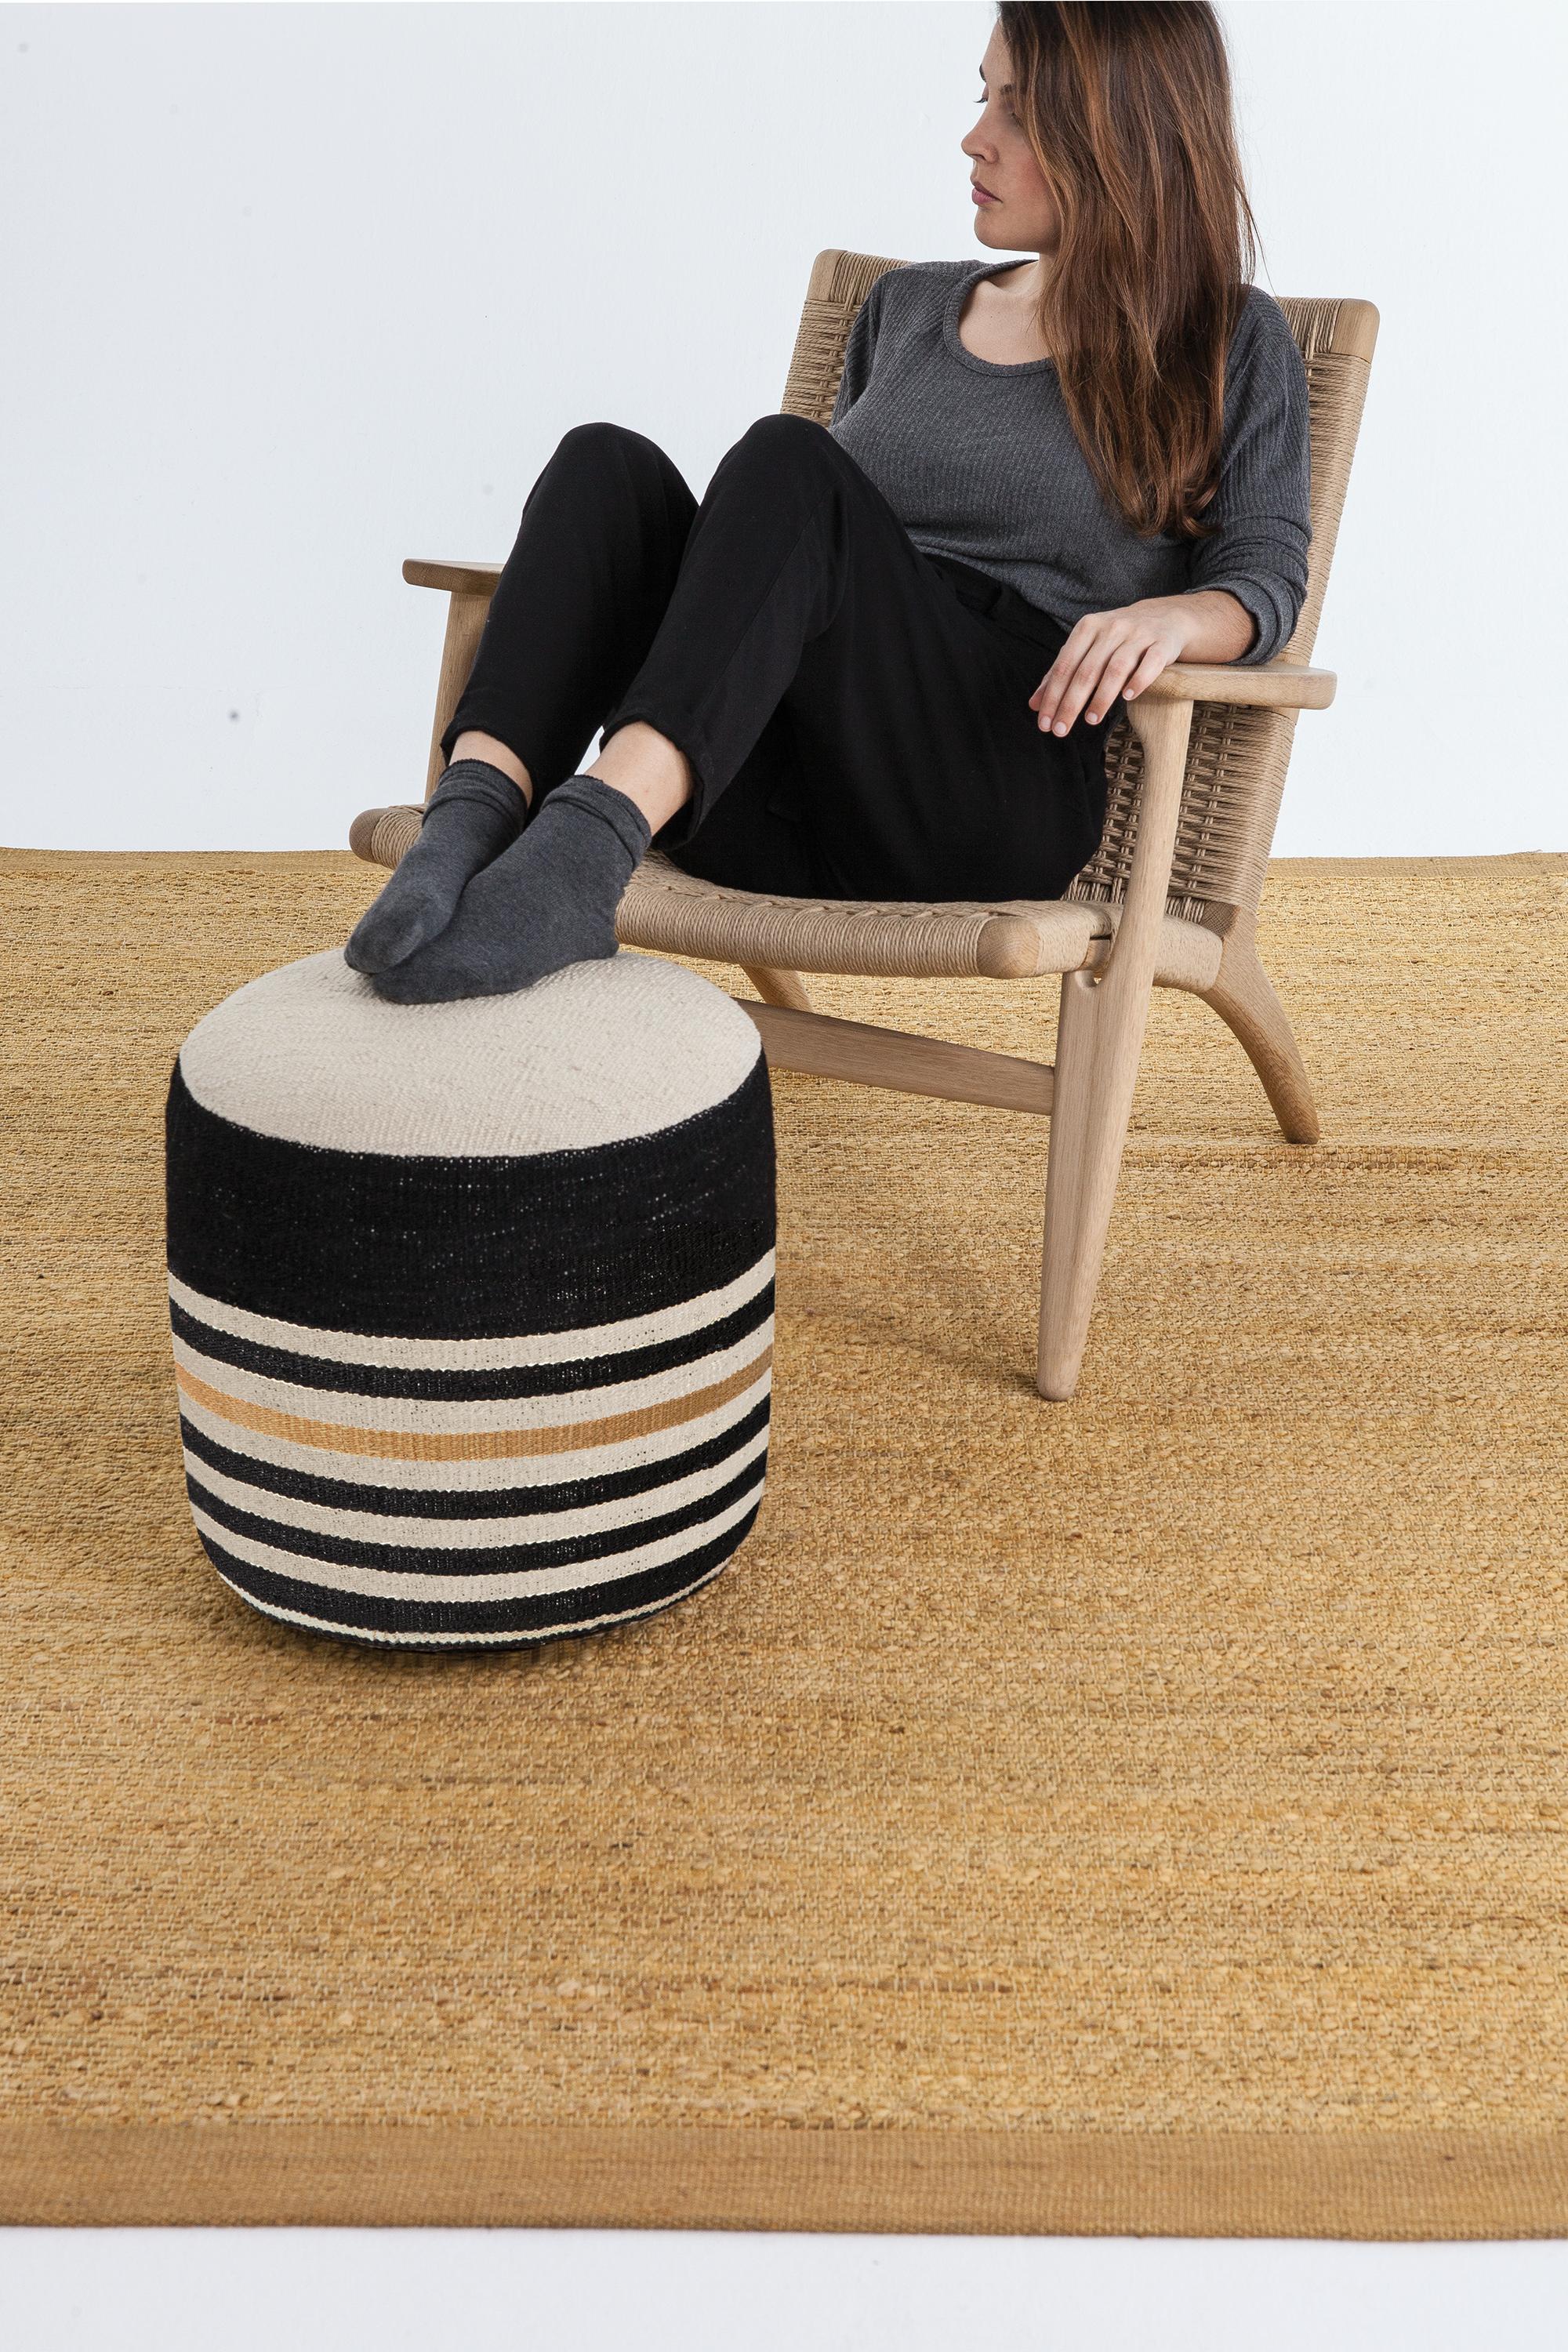 'Kilim 4' Pouf by Nani Marquina and Marcos Catalán for Nanimarquina For Sale 1